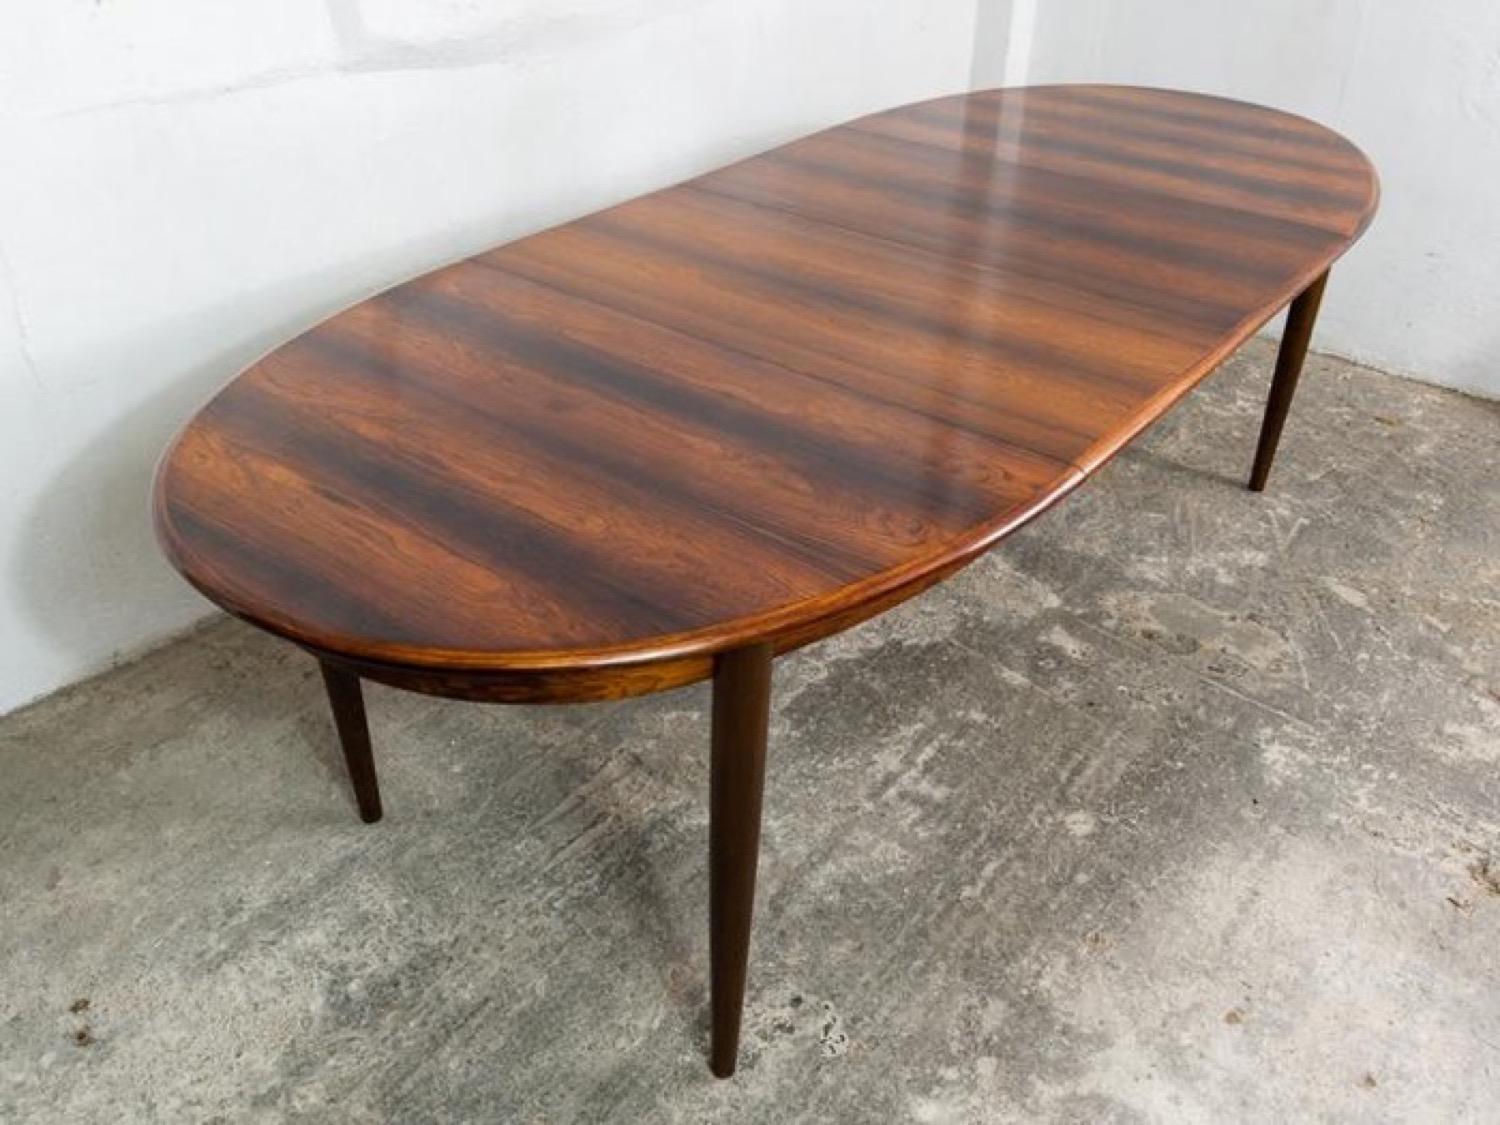 A beautiful extending and restored 1960s Gudme Møbelfabrik Danish rosewood extendable dining table. The table easily sits 8 to 10 people comfortably when fully extended with its two additional leaves in place. Gudme Møbelfabrik was well known for